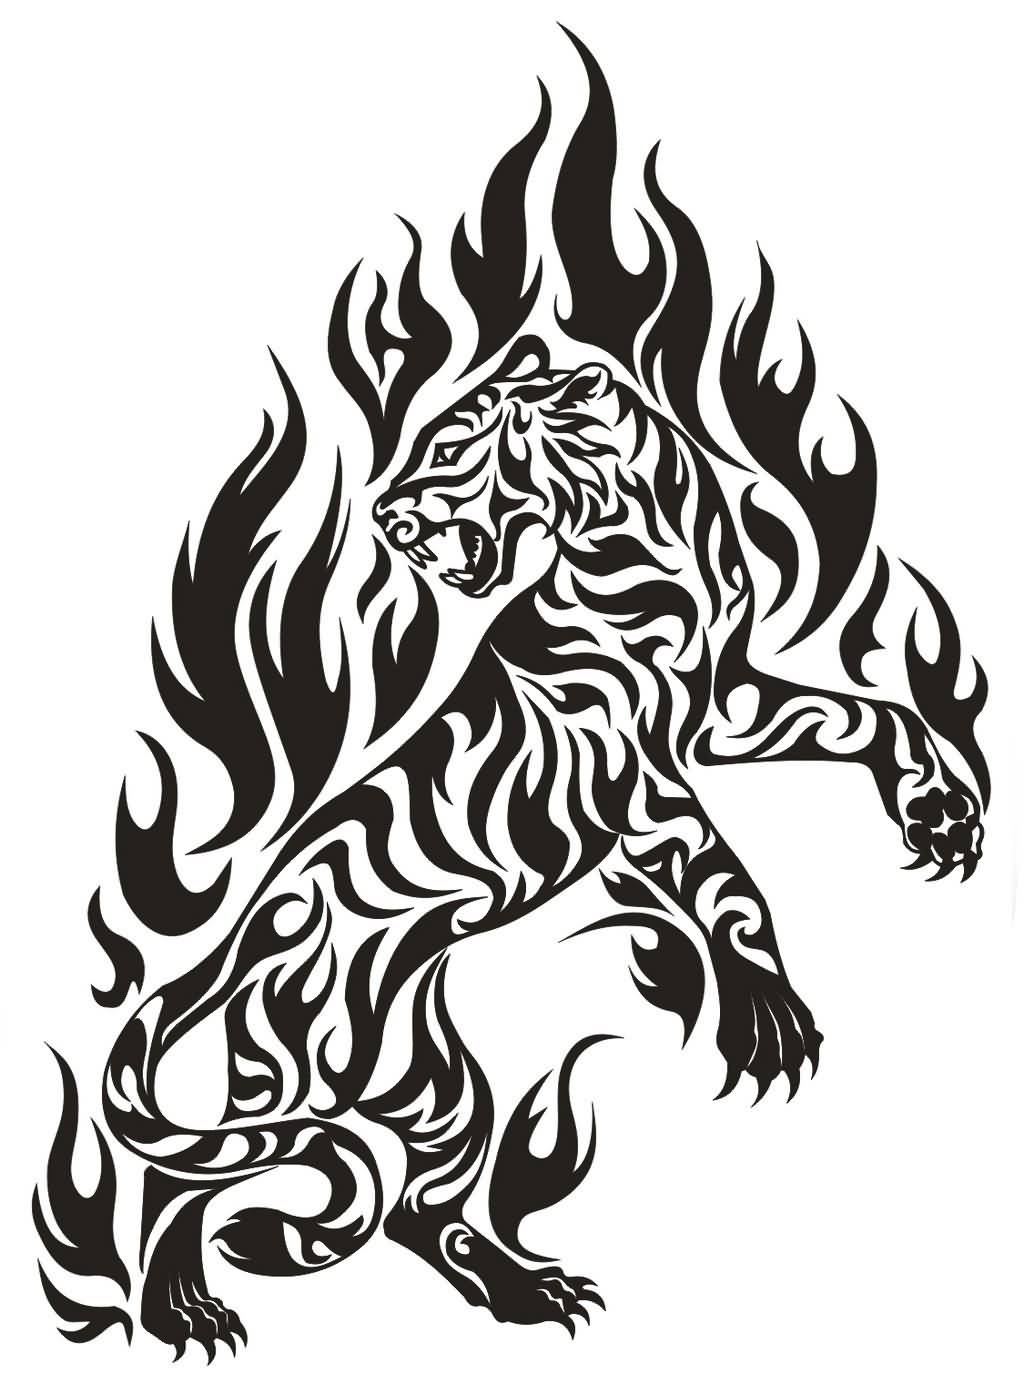 Awesome Tribal Tiger With Flames Tattoo Stencil